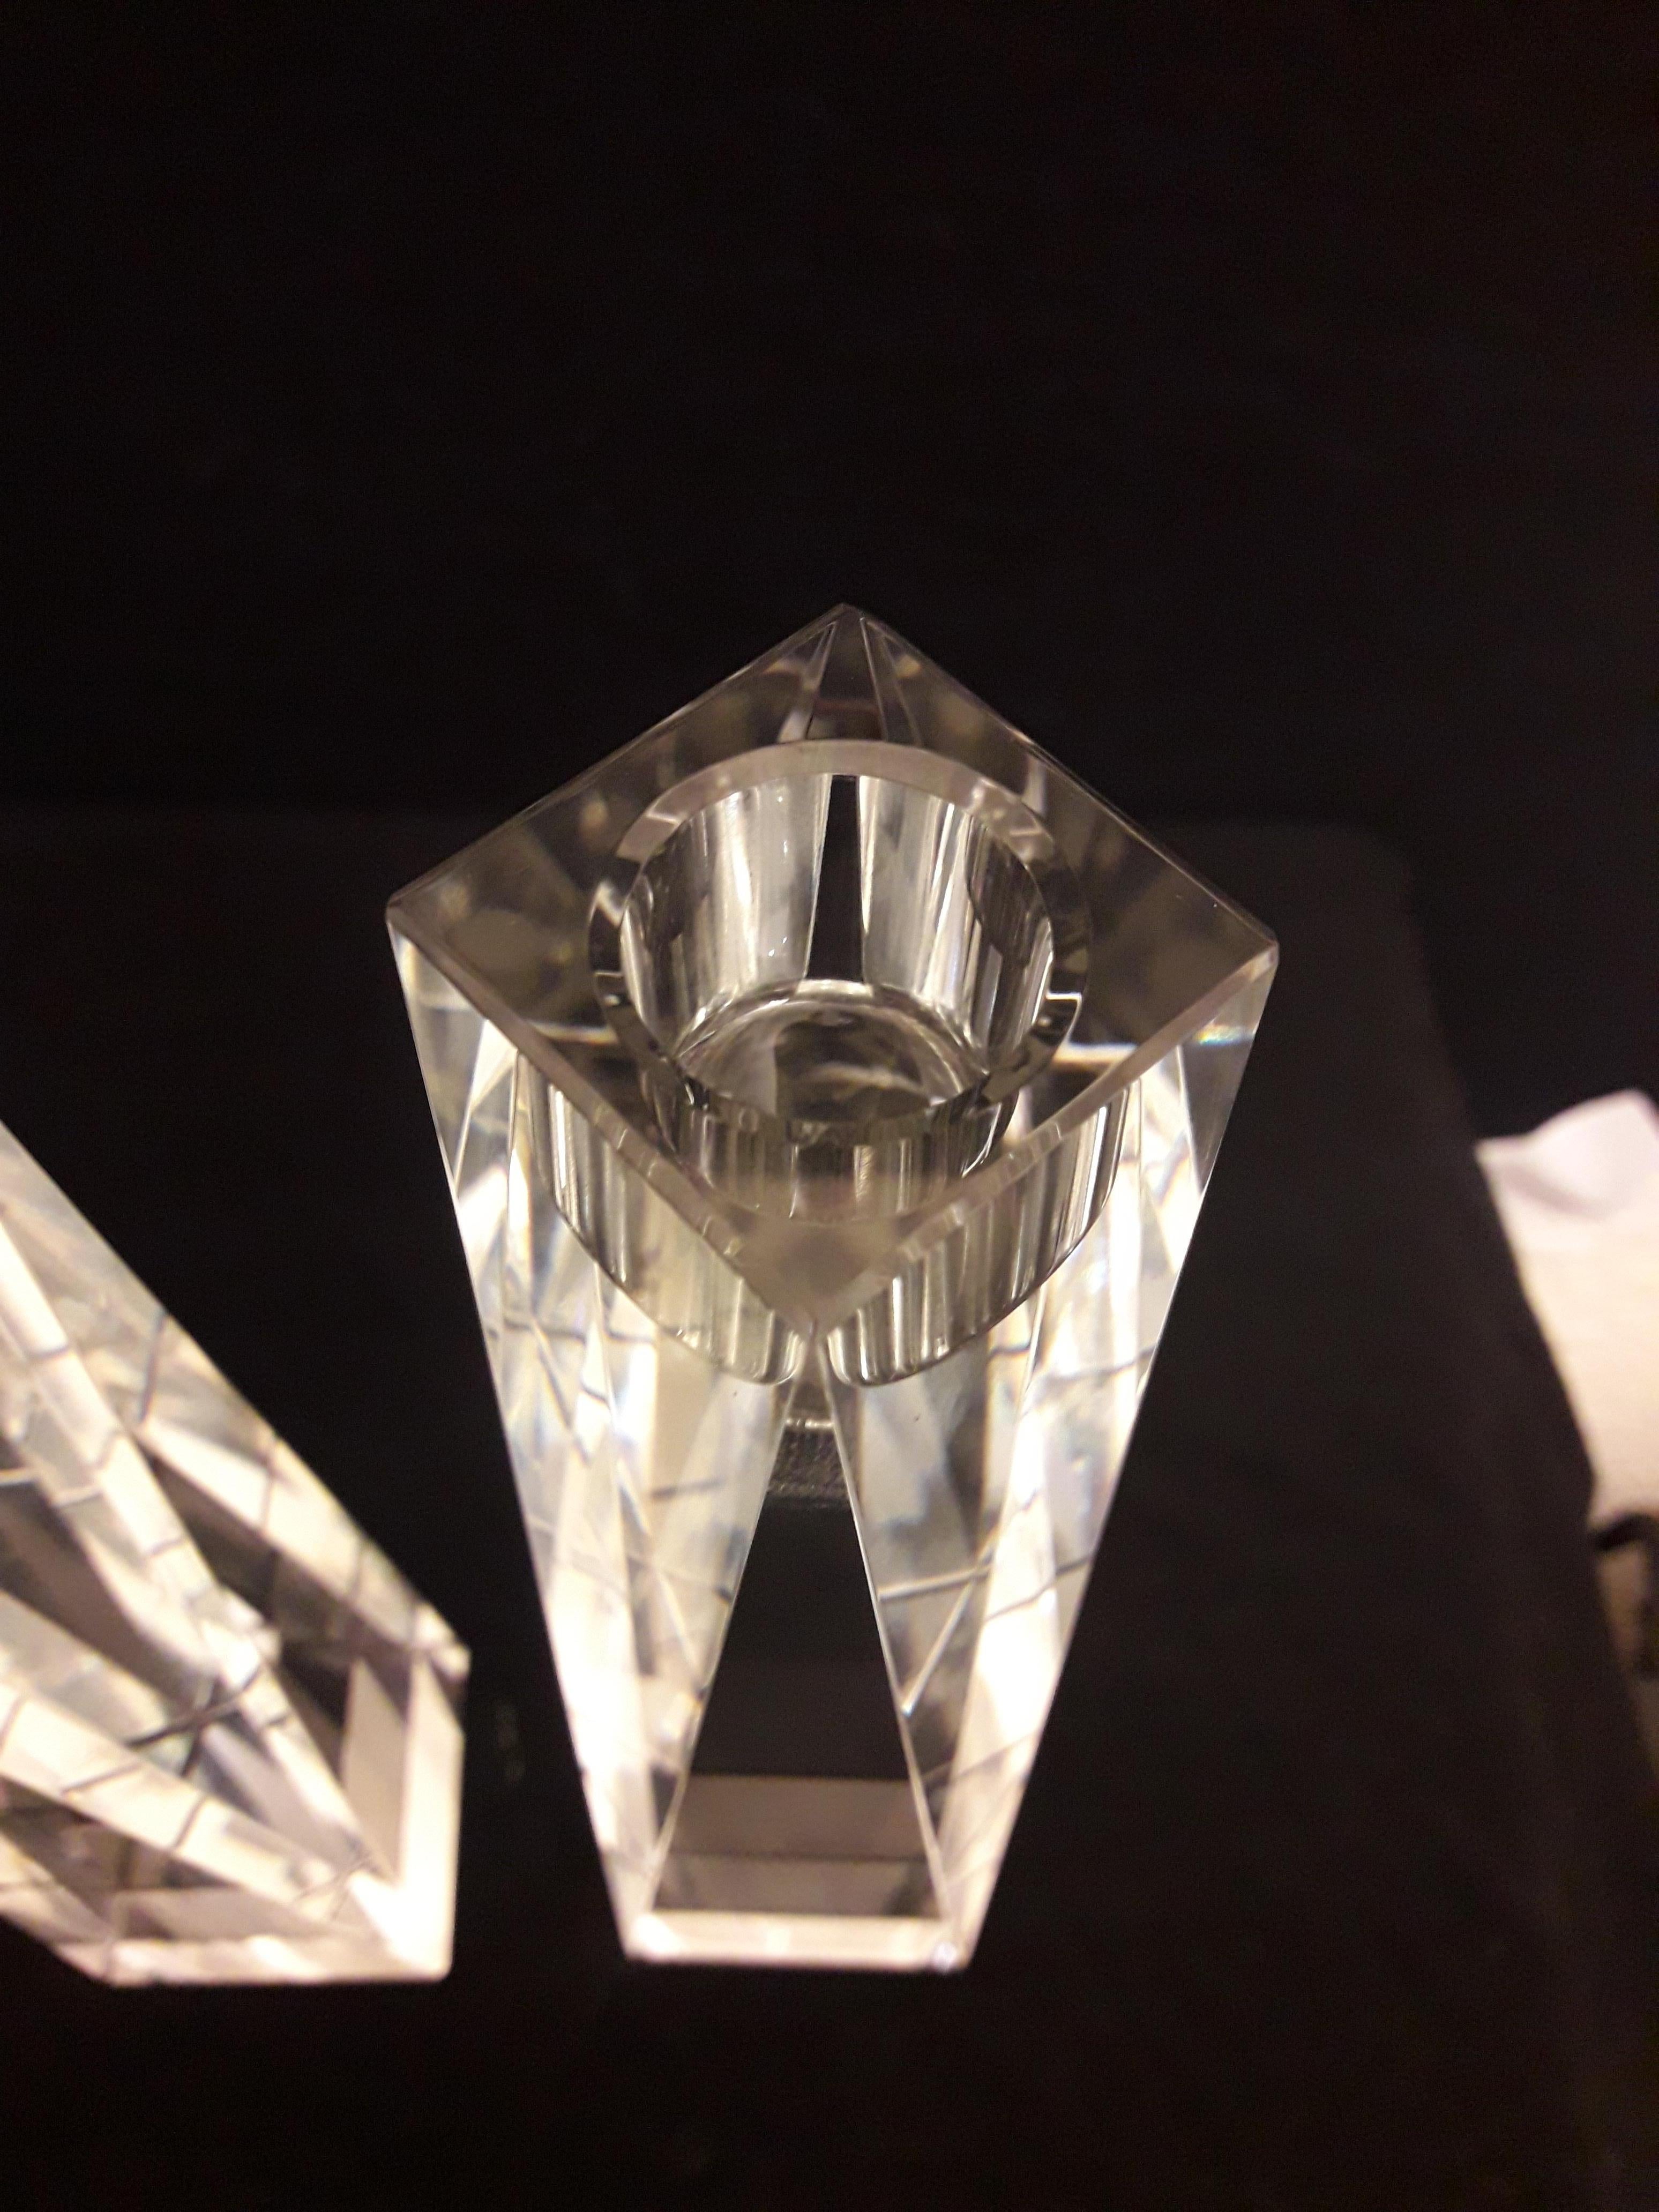 Vitange Faceted Crystal Candle Holders Signed Oleg Cassini In Excellent Condition For Sale In Grantham, GB